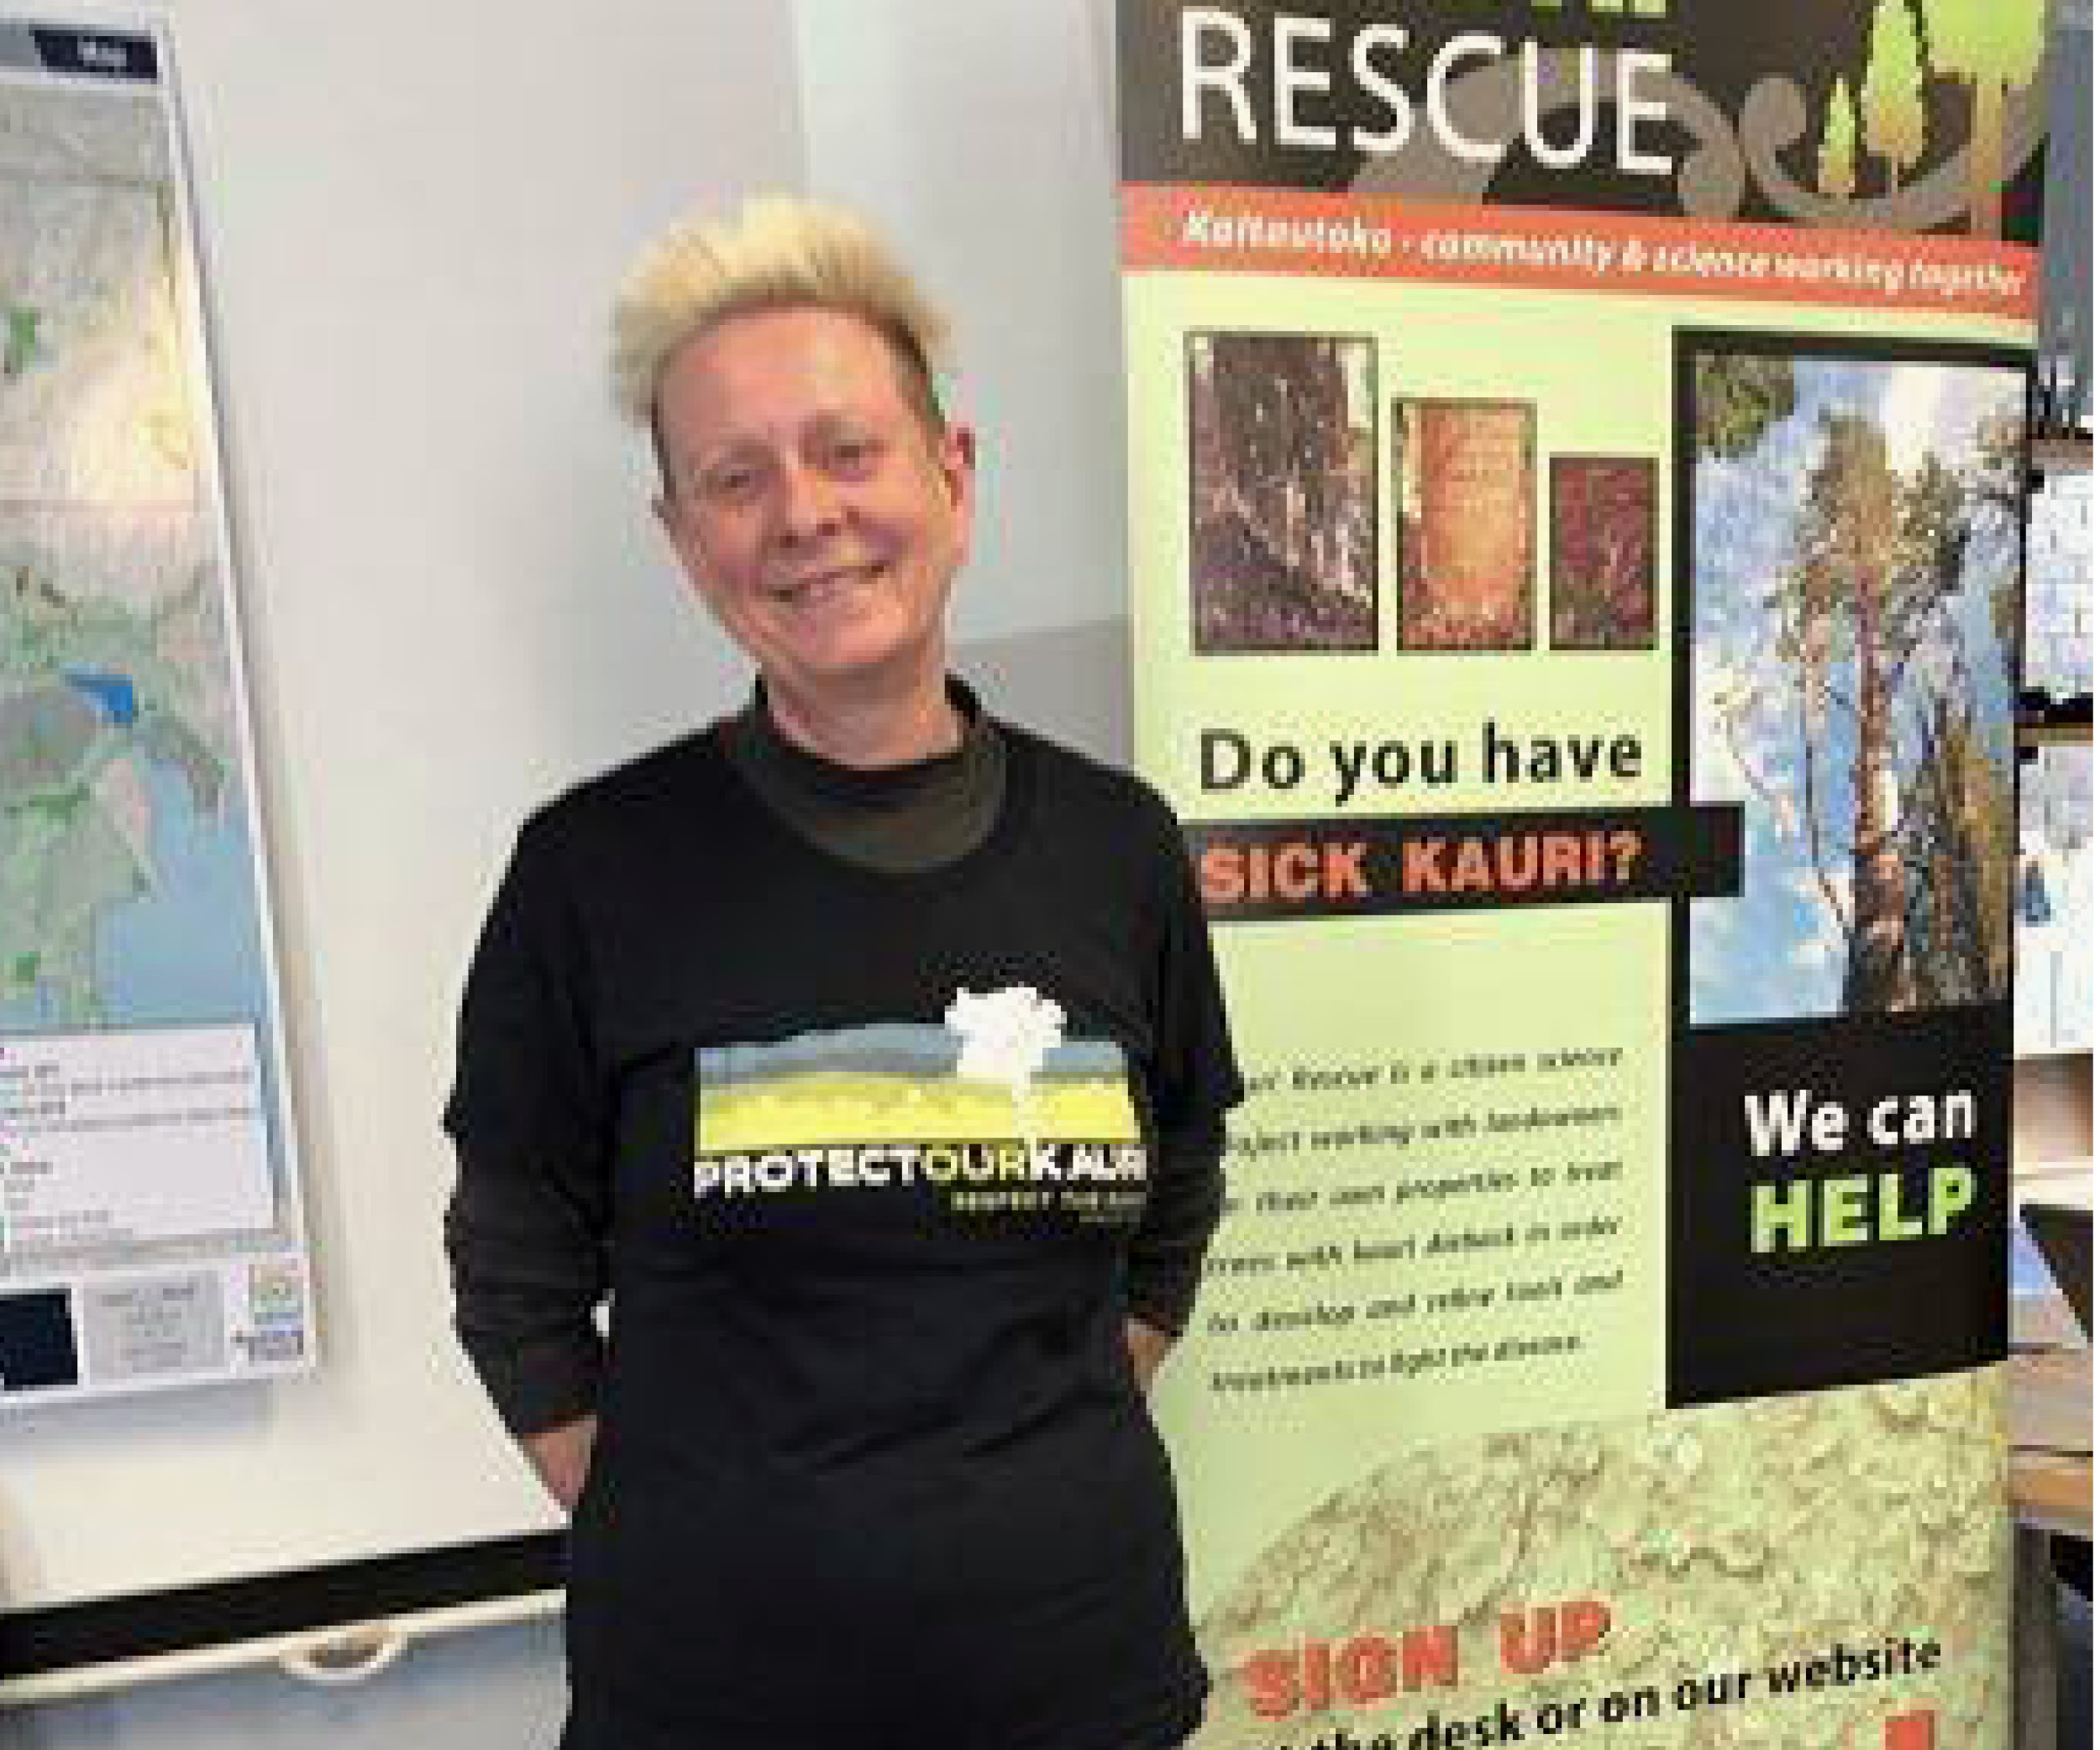 Dr Mel’s Barton of the Tree Council on Saving Auckland’s Natural Heritage and Fighting Kauri Dieback